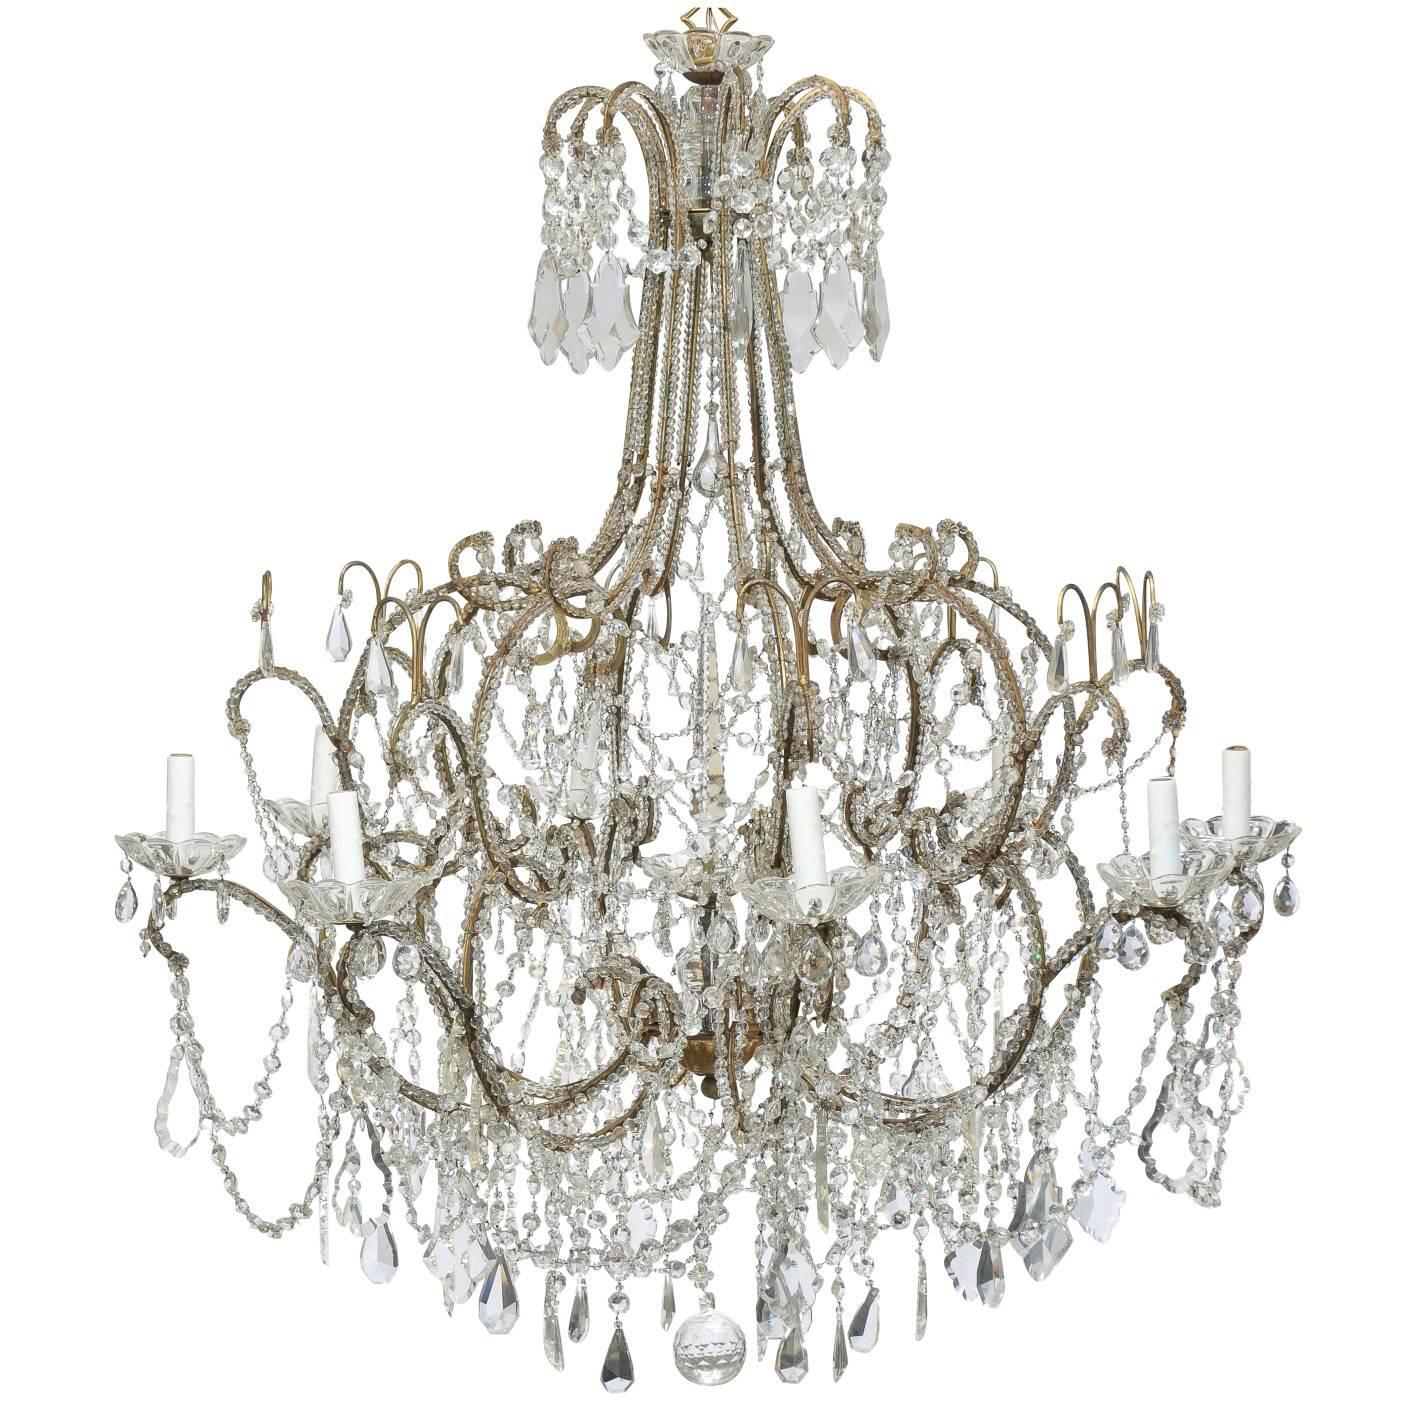 Large Italian 1920s Crystal Gilt Metal Eight-Light Chandelier with Scrolled Arms For Sale